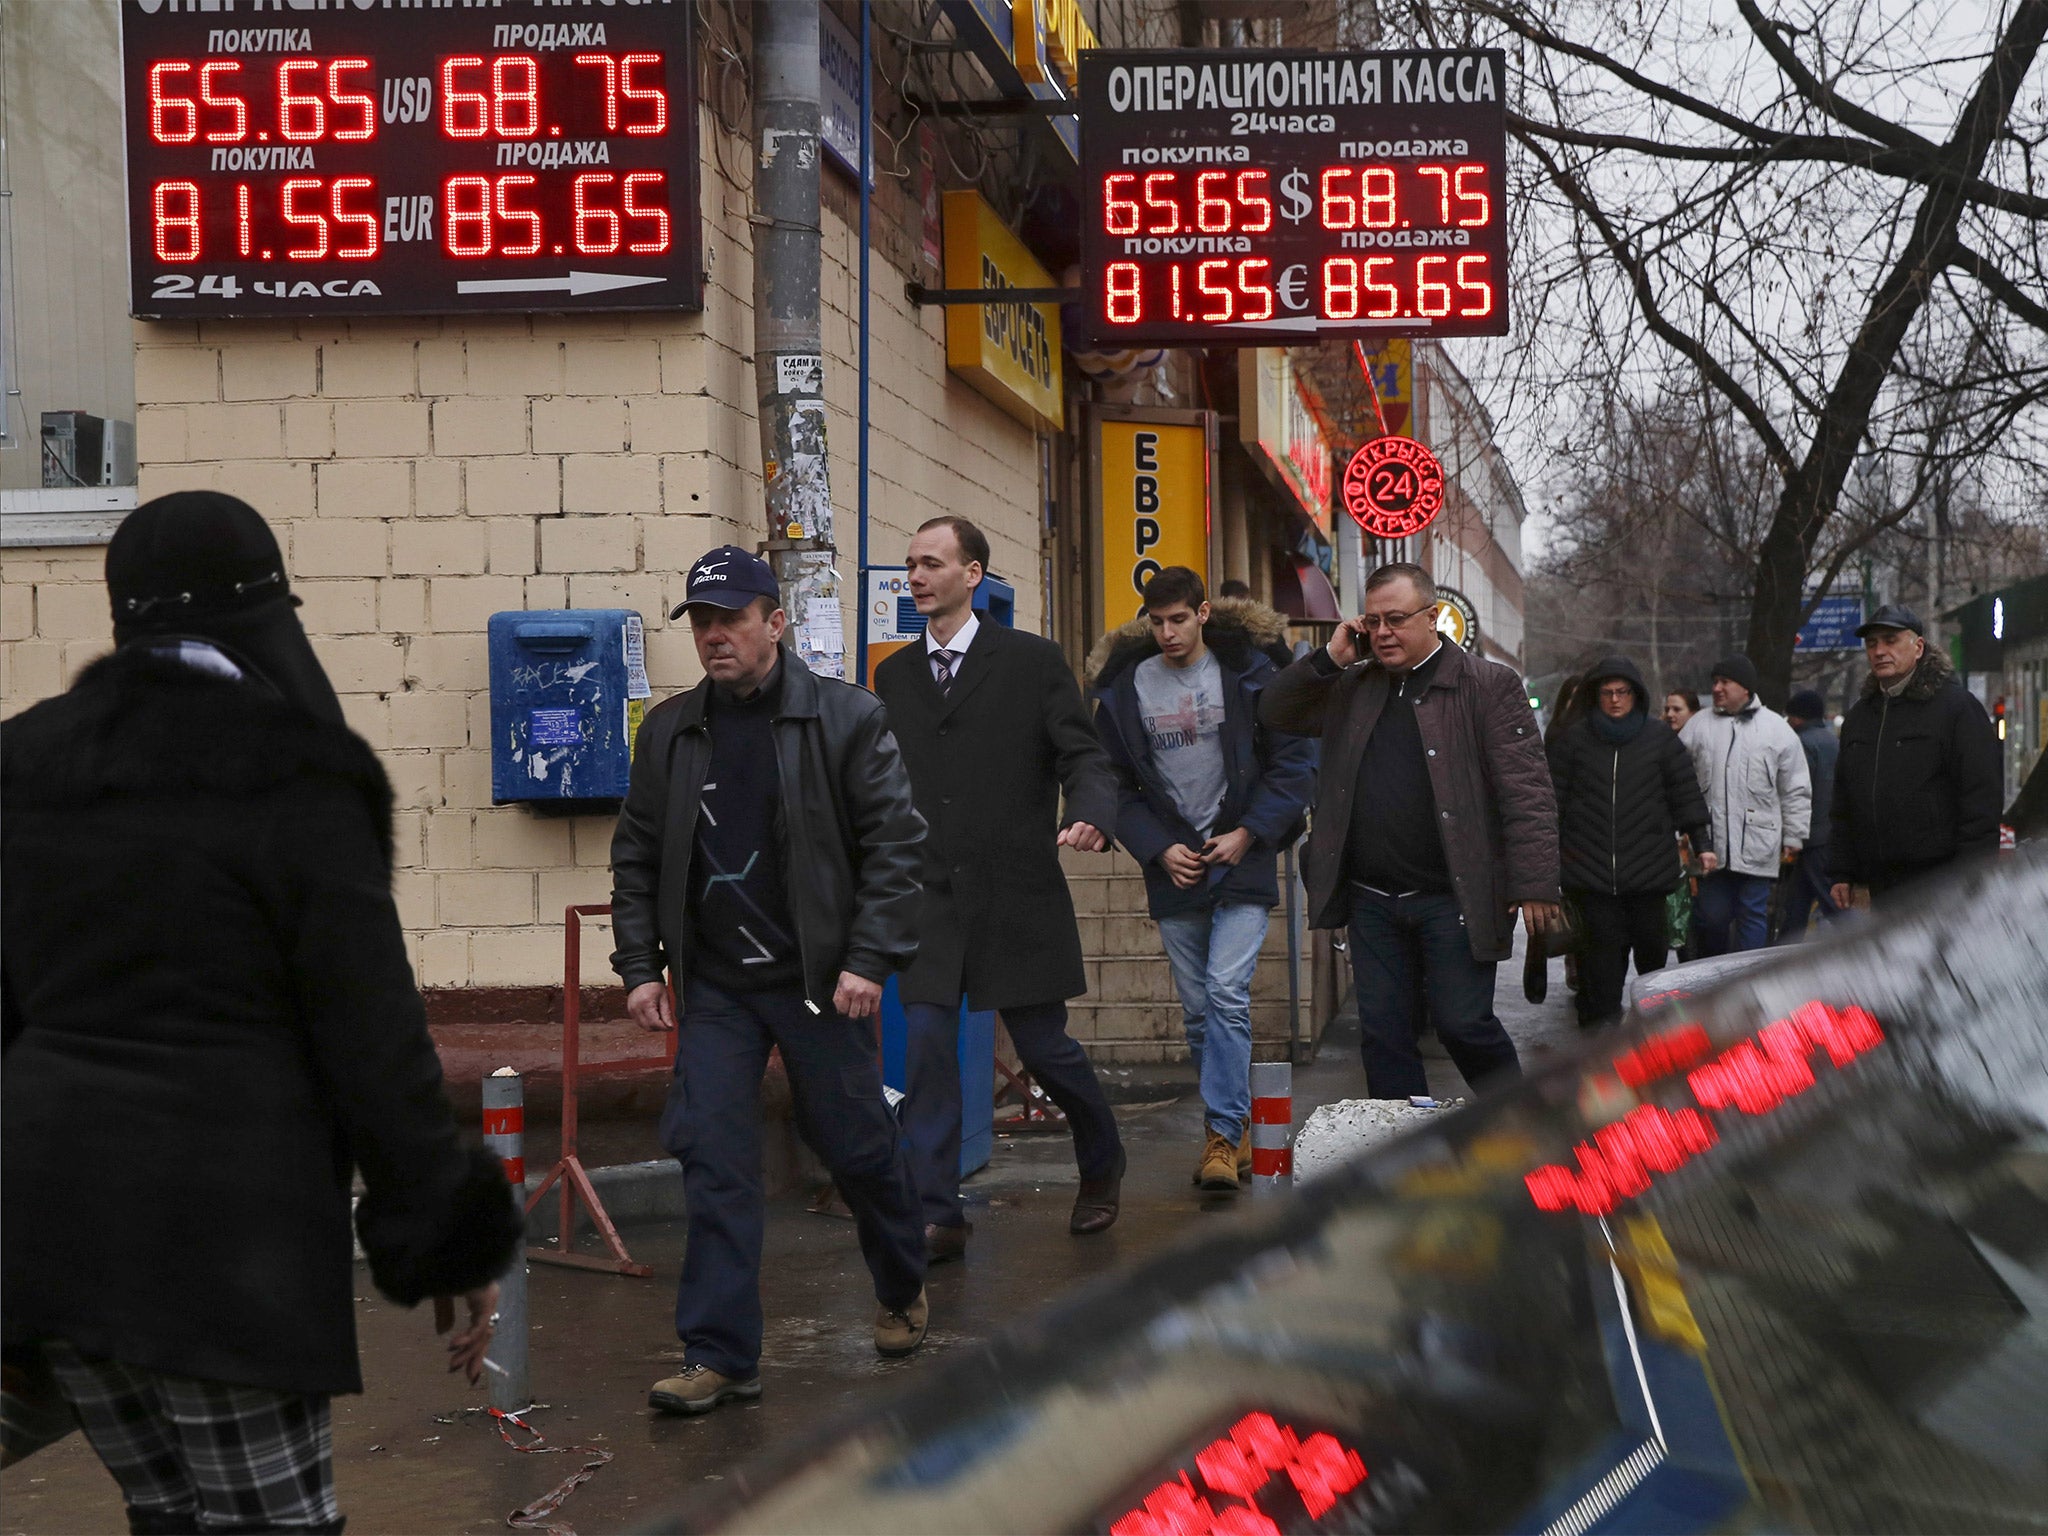 The rouble plunged to a record low against the dollar as the country’s stock market and derivatives exchange remained closed